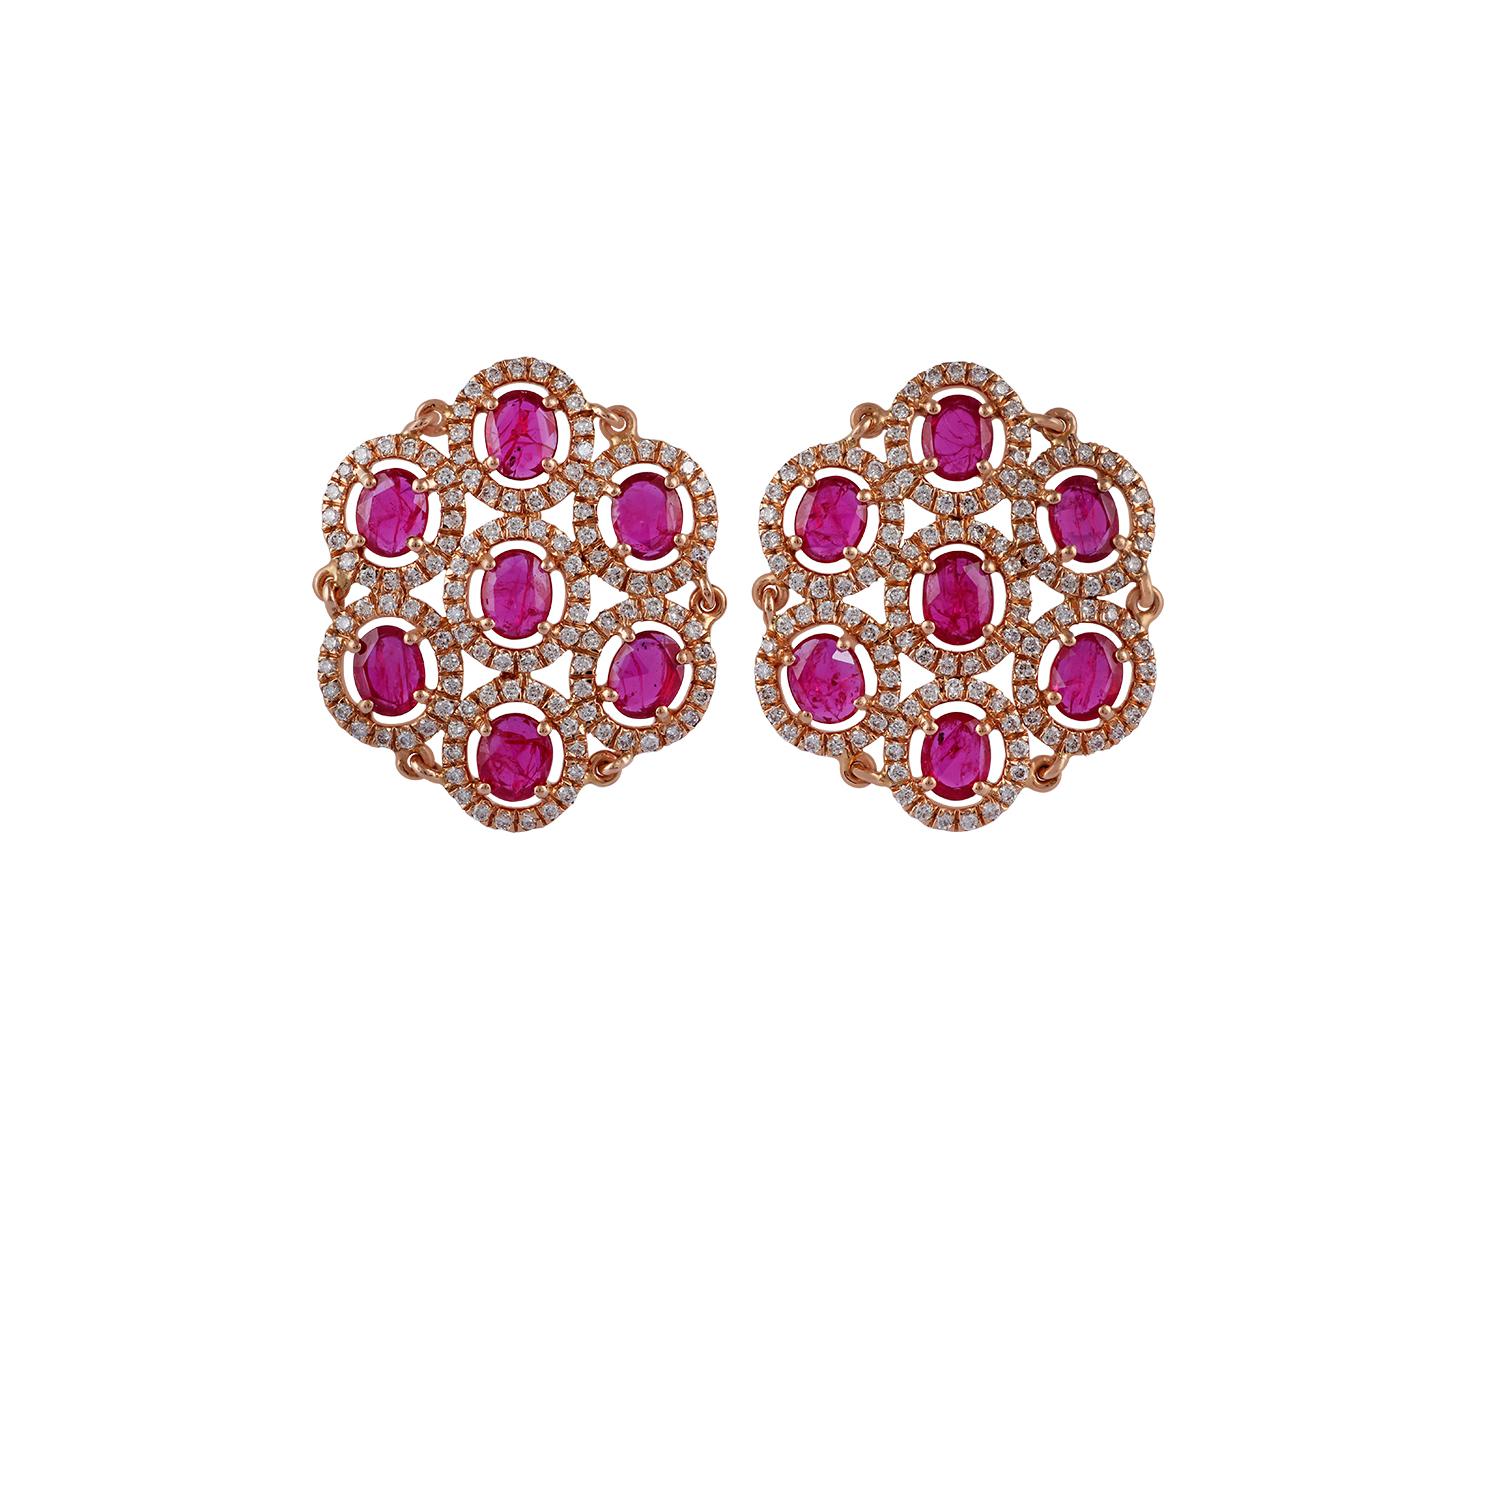 Rose Cut Ruby and Diamond Earrings Studded in 18 Karat Rose Gold For Sale